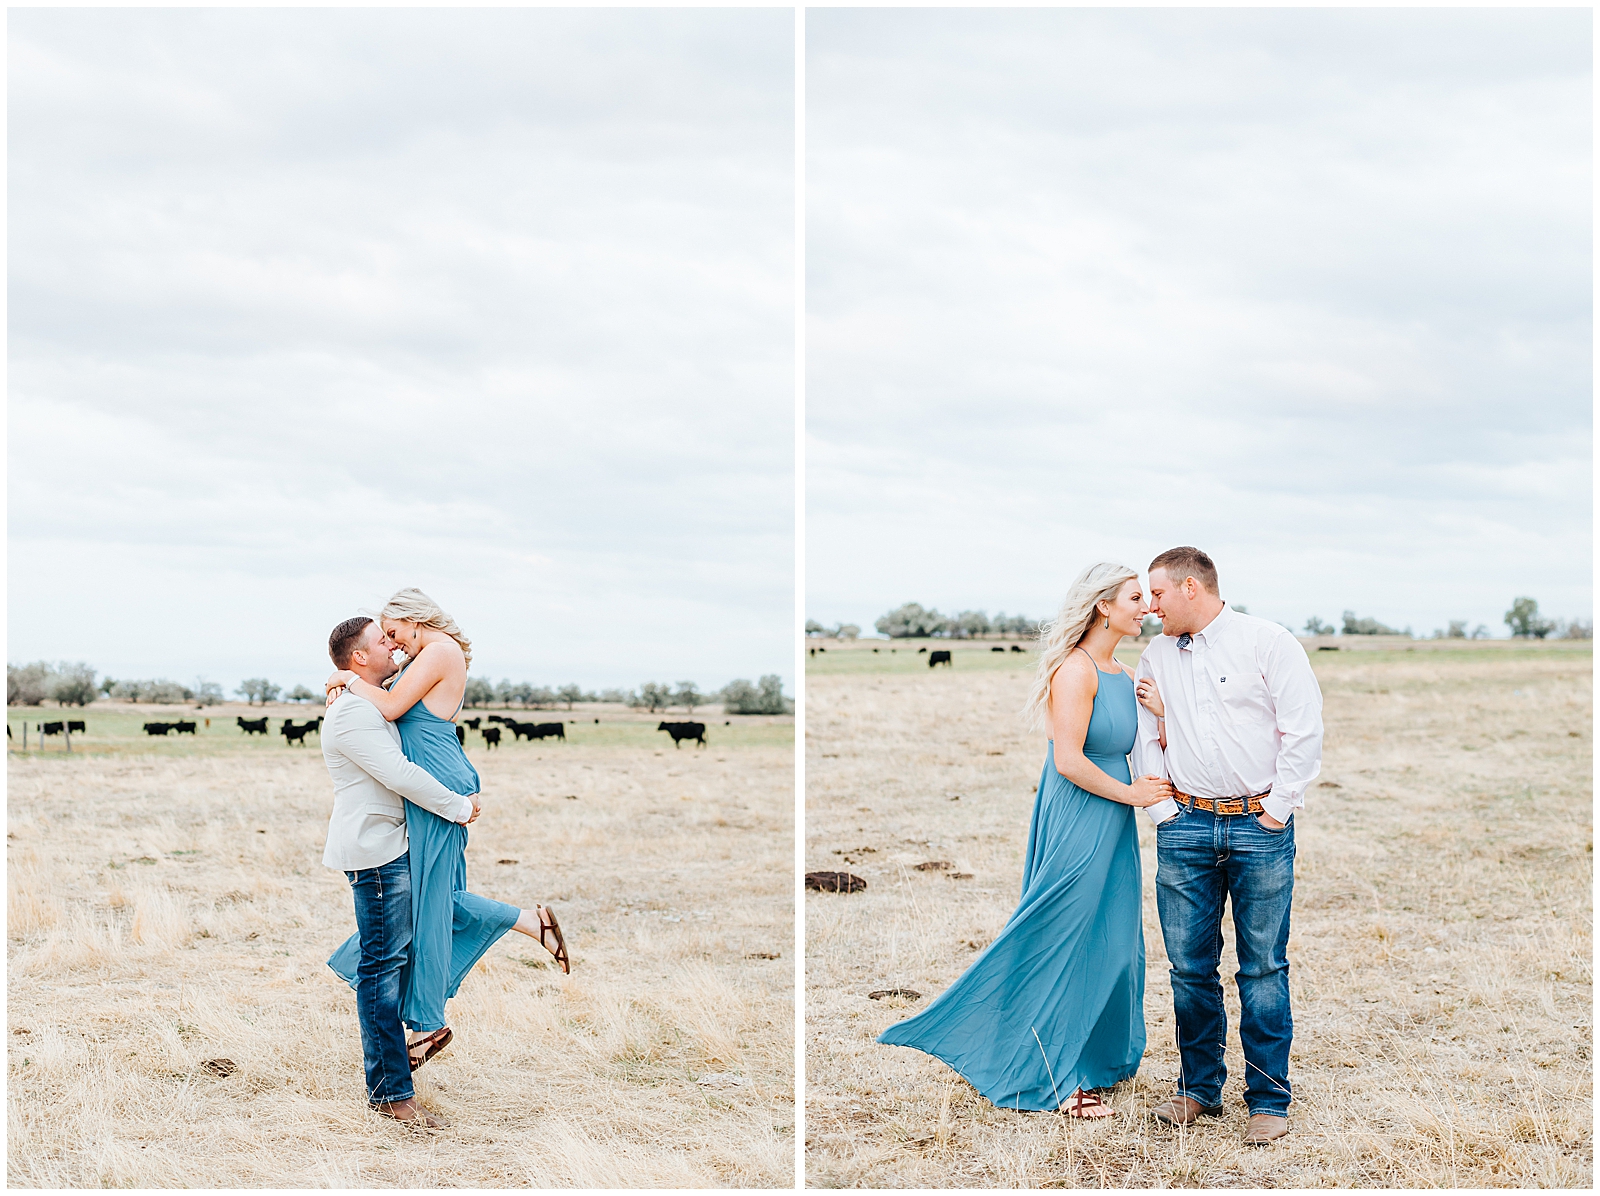 Engagement Photos with Cows